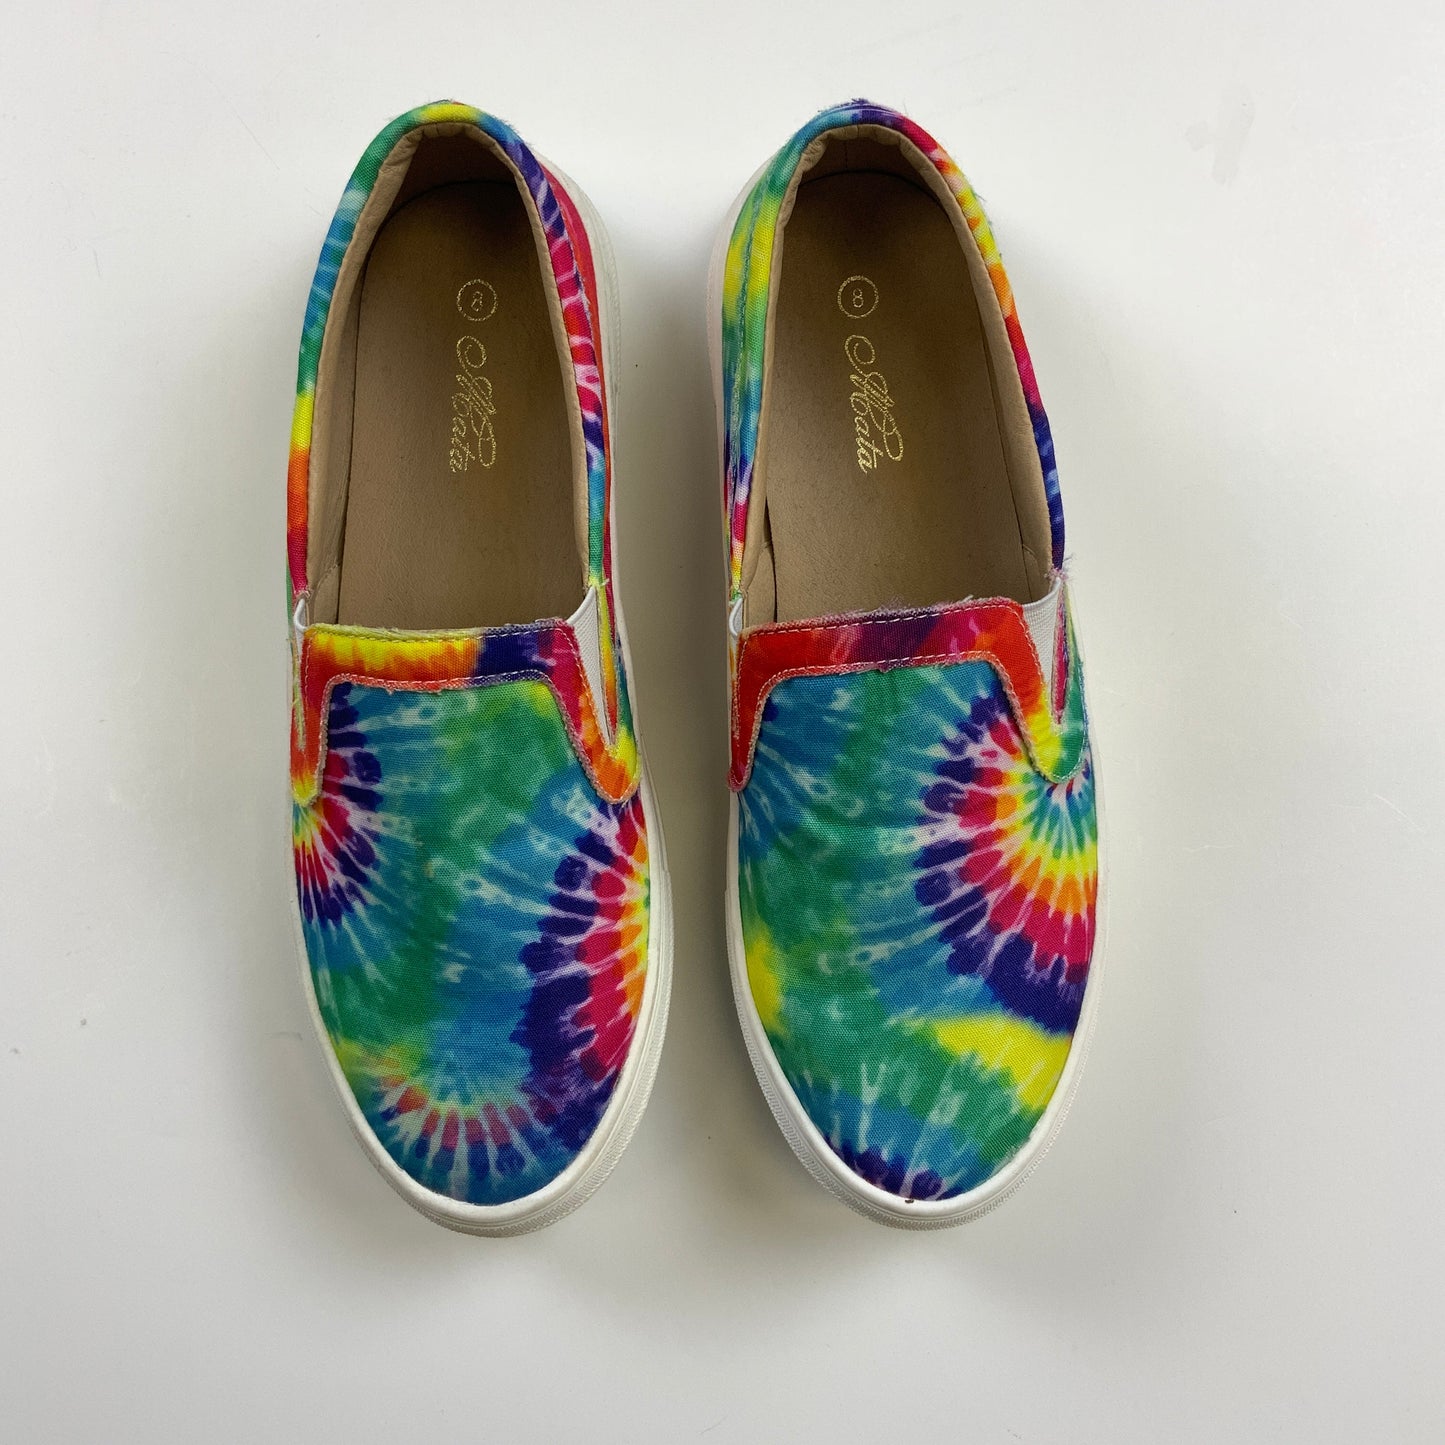 Tie Dye Print Shoes Sneakers Clothes Mentor, Size 8